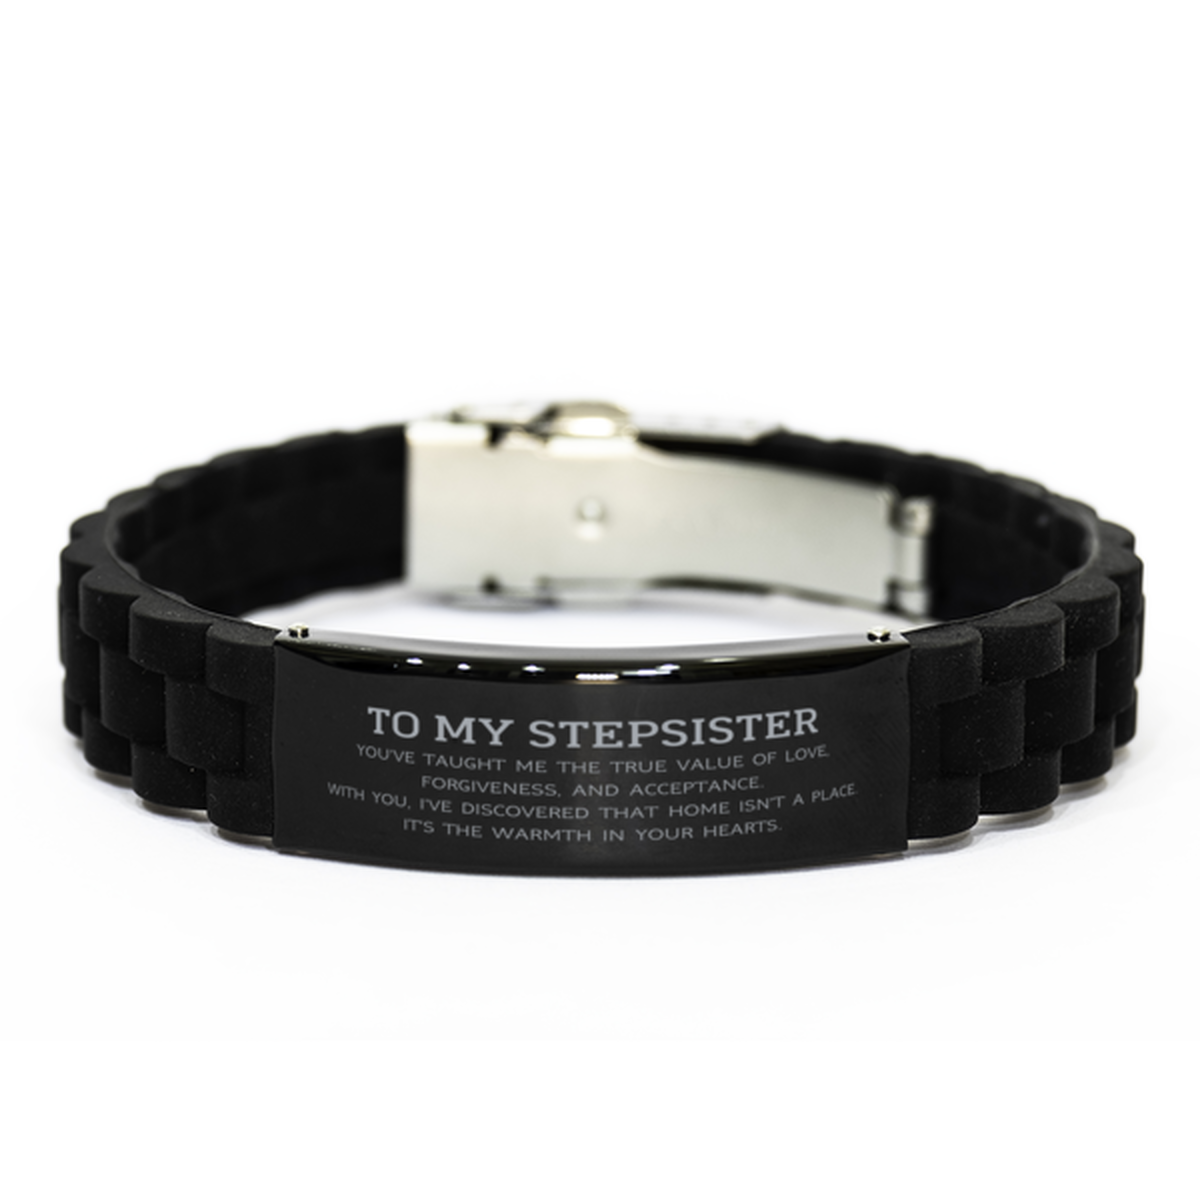 To My Stepsister Gifts, You've taught me the true value of love, Thank You Gifts For Stepsister, Birthday Black Glidelock Clasp Bracelet For Stepsister